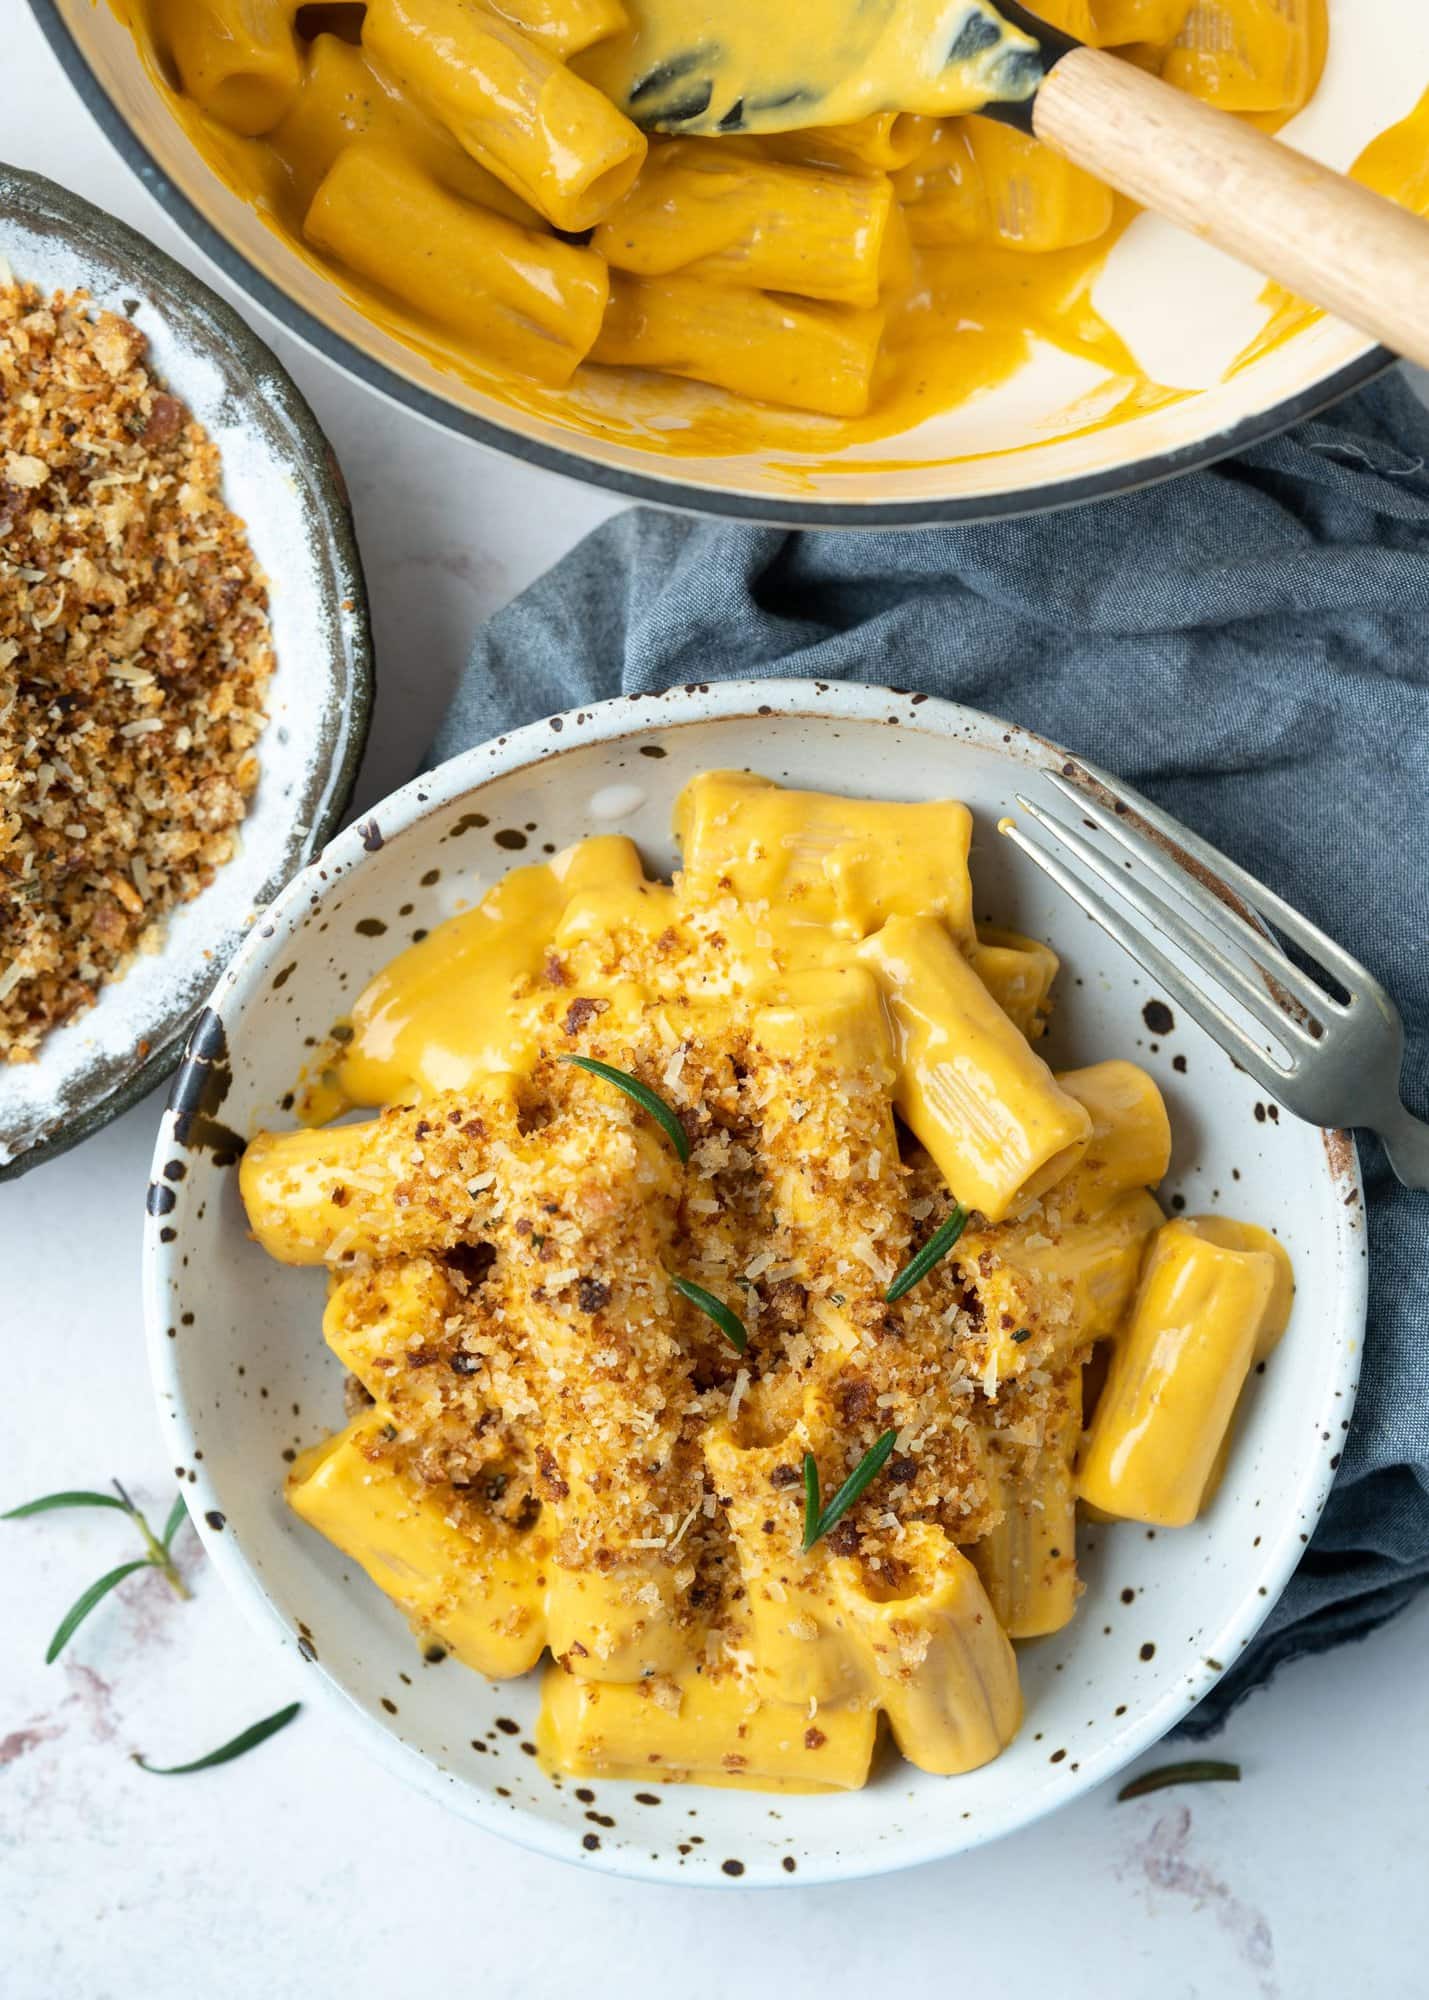 Bowl of Rigatoni pasta in a roasted butternut squash sauce, topped with breadcrumbs. 